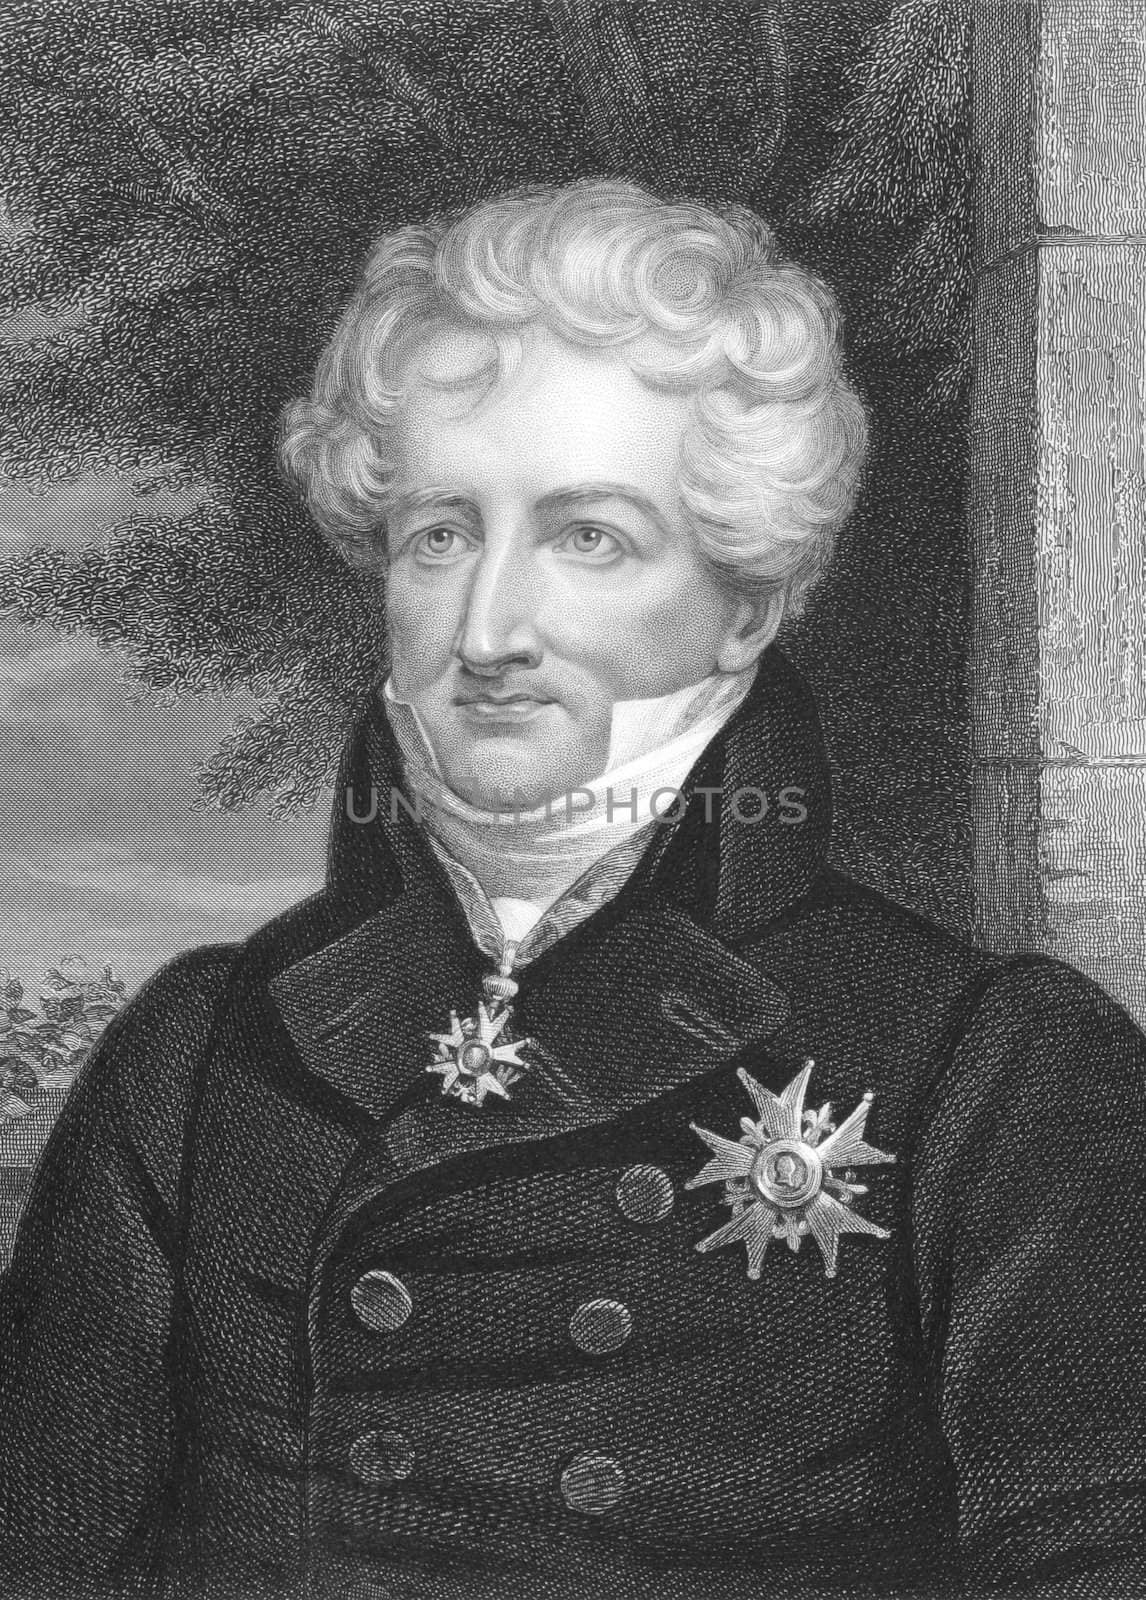 Georges Cuvier (1769-1832) on engraving from the 1800s. French naturalist and zoologist. Engraved by J.Thomson and published in London by W.Mackenzie.